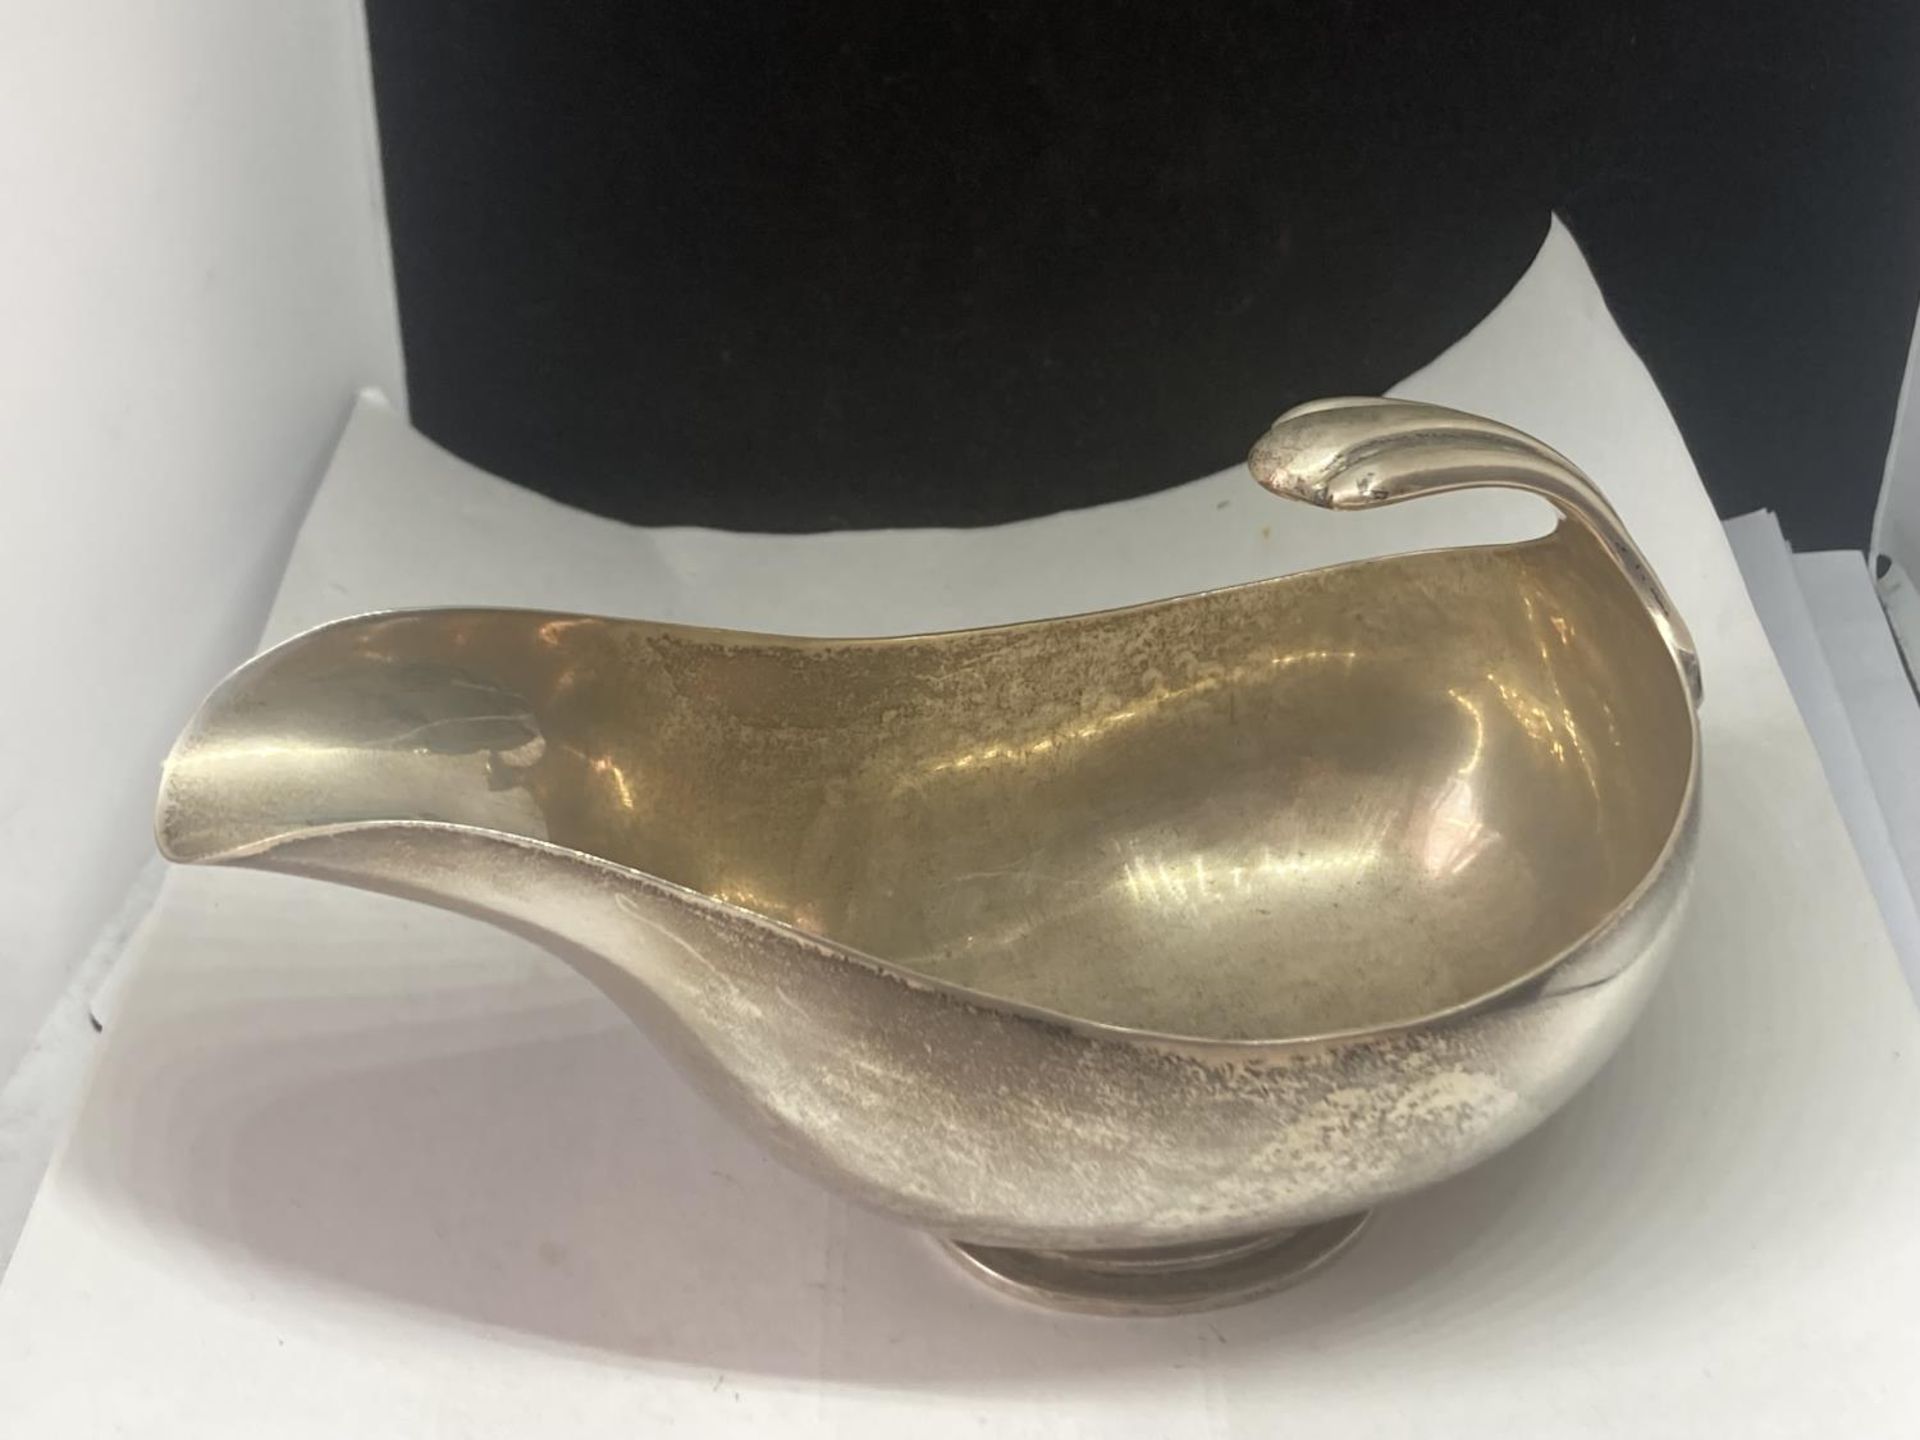 A HALLMARKED CHESTER SILVER GRAVY BOAT GROSS WEIGHT 200.5 GRAMS - Image 2 of 8